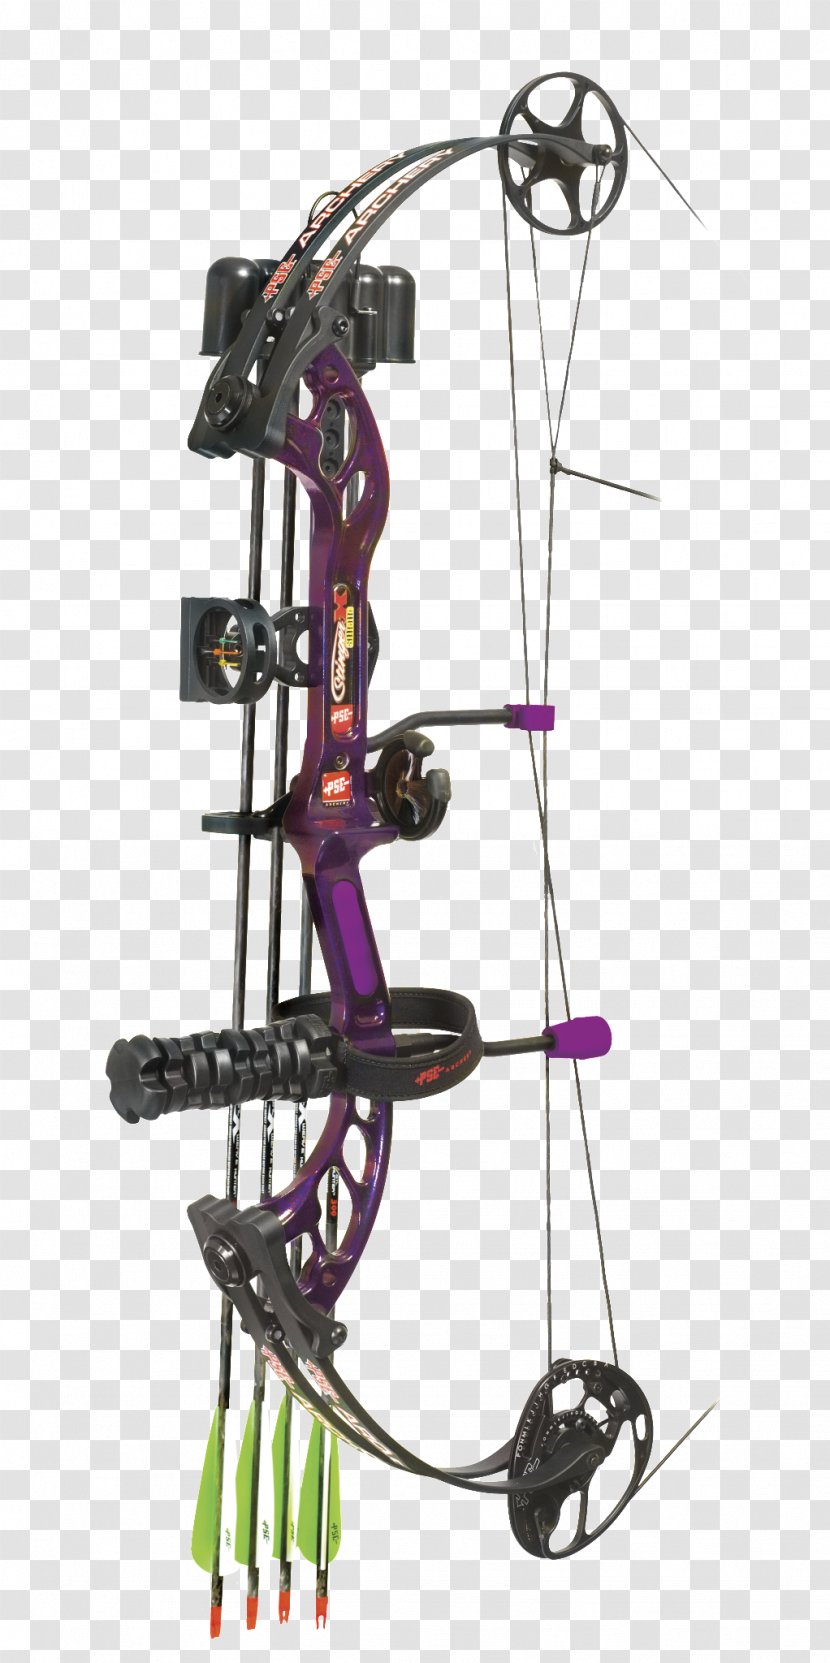 Compound Bows PSE Archery Bow And Arrow Hunting - Ranged Weapon - Puppies Transparent PNG